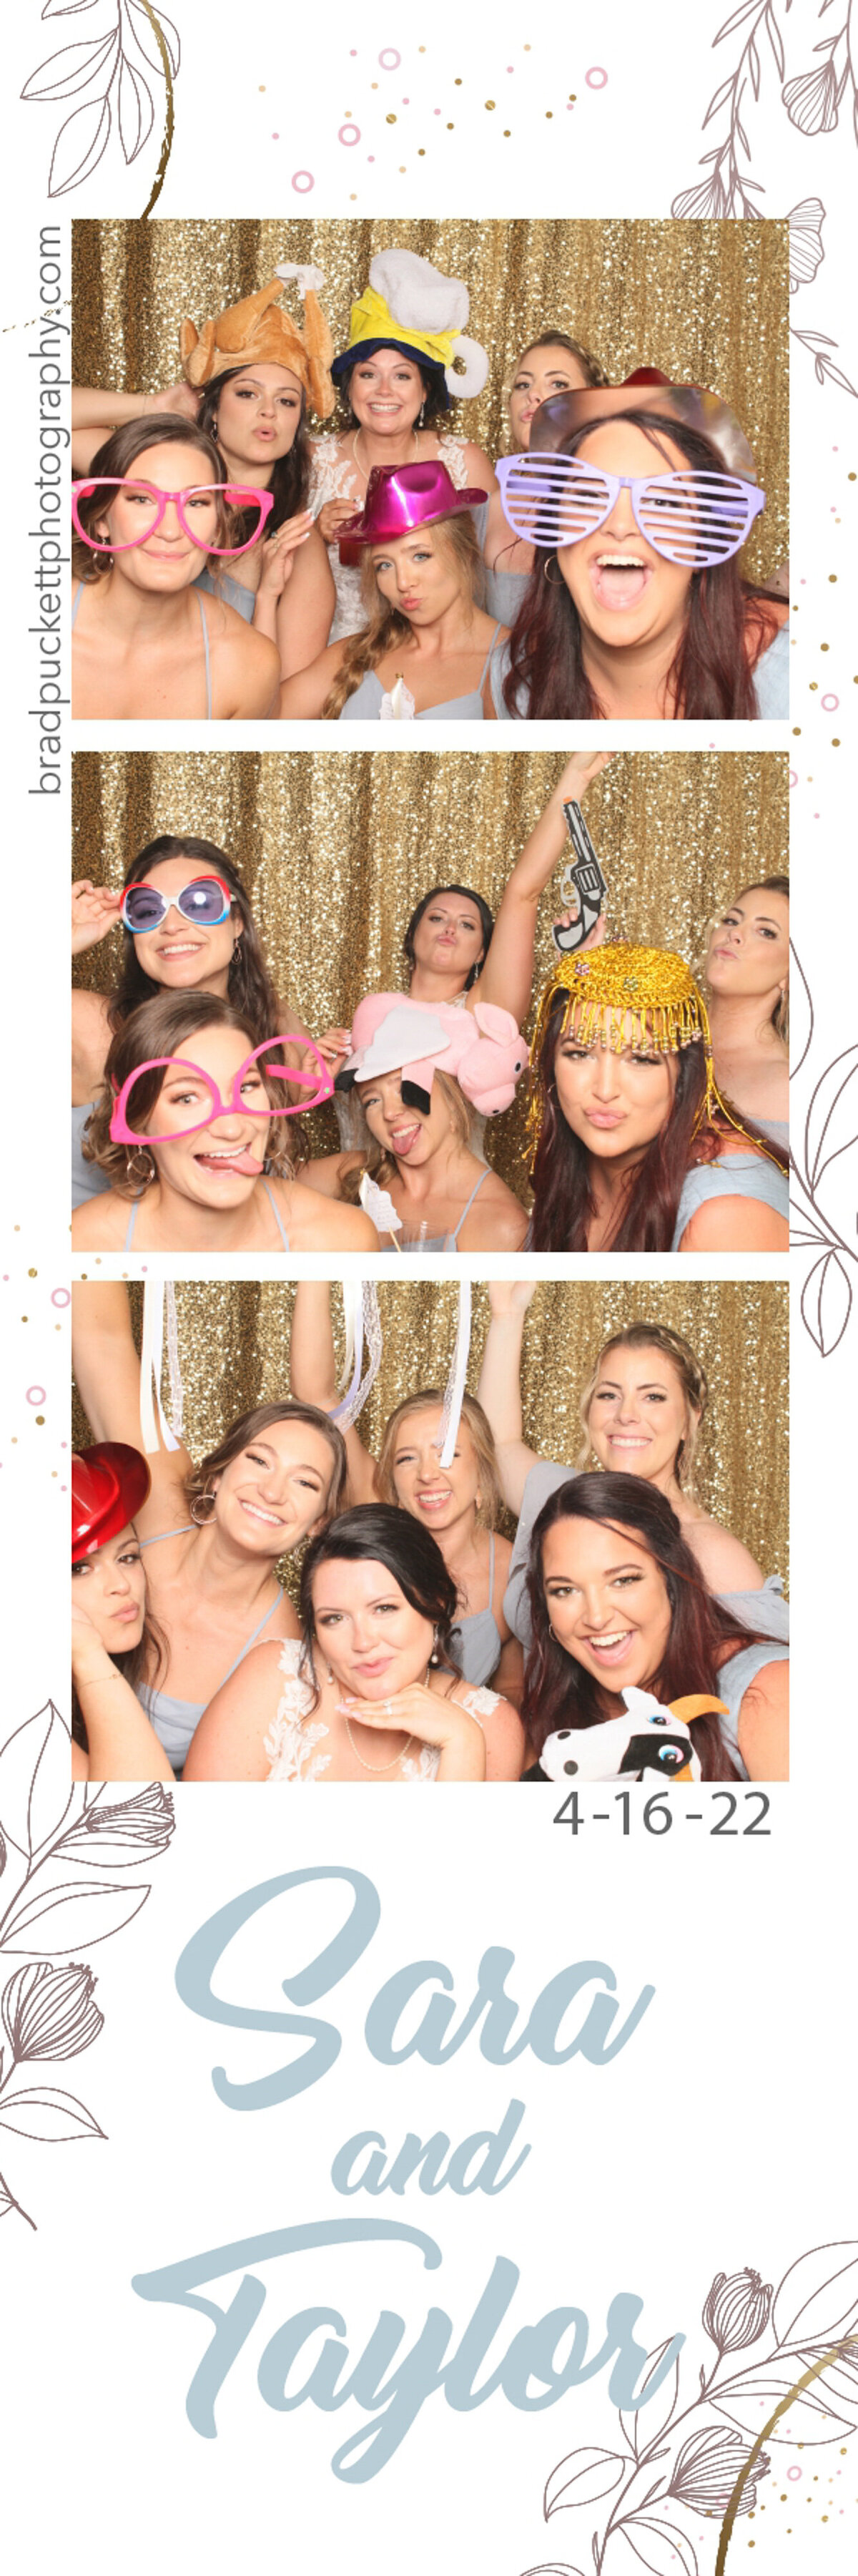 Photo booth rental at Belforest Point, Alabama for Sara & Taylor's wedding reception.